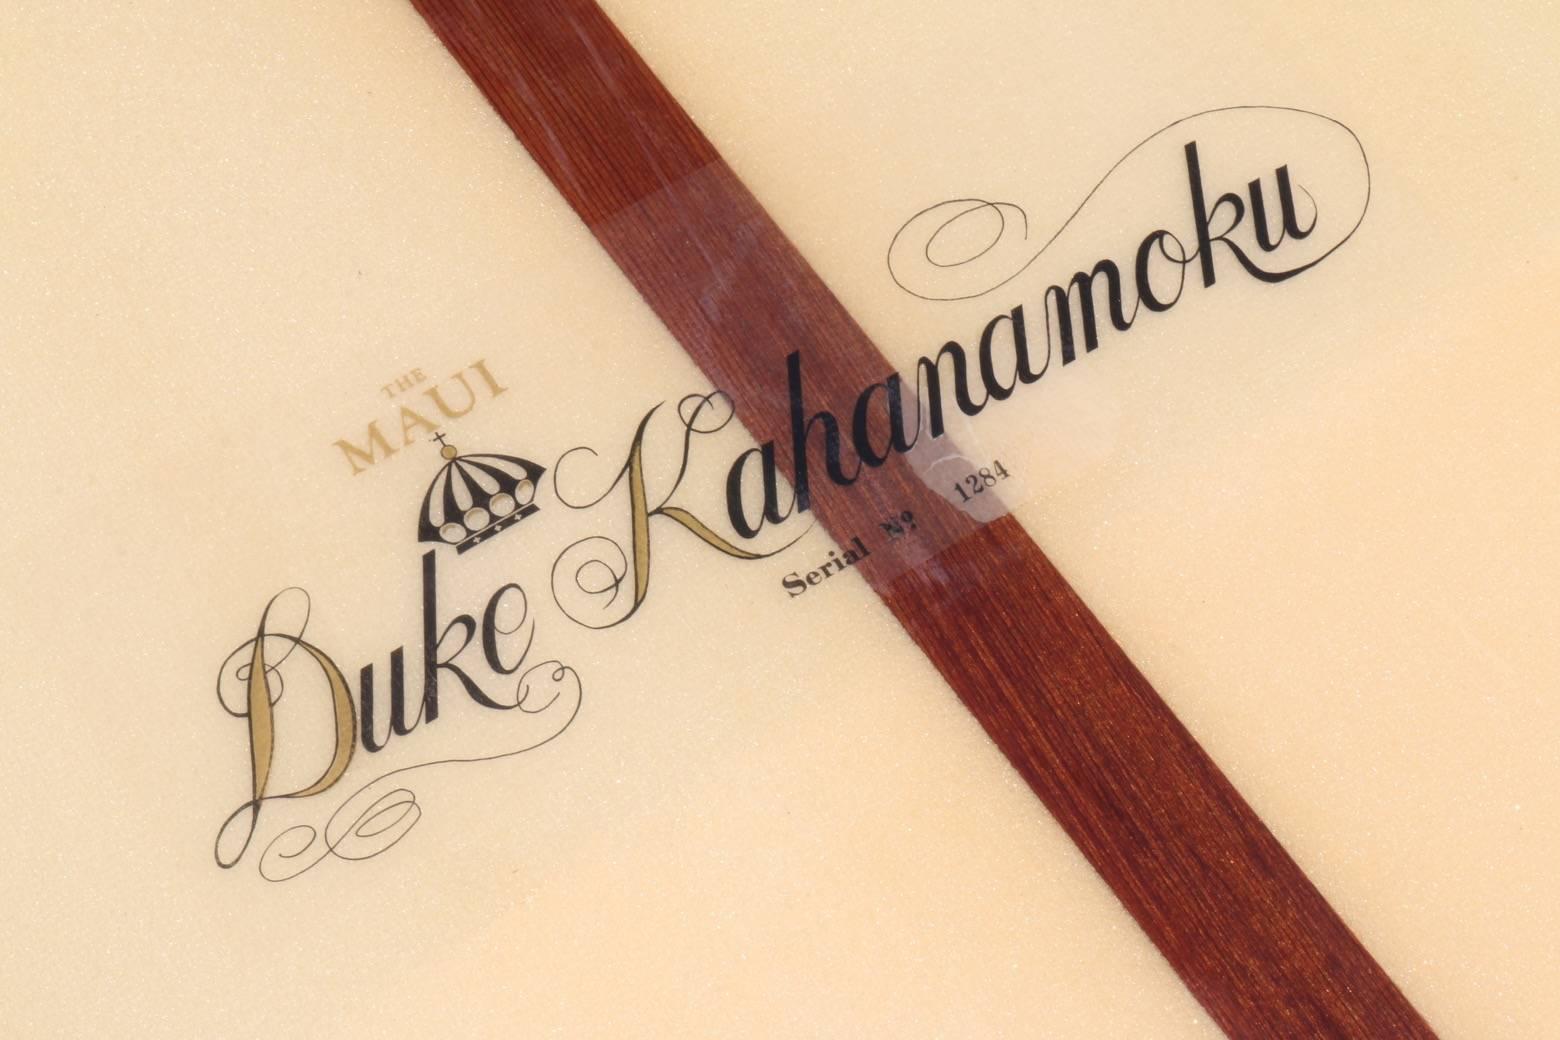 It is remarkable that this beautiful early 1960s Duke Kahanamoku surfboard has survived for 50+ years and remains in such excellent condition. The fiberglass
has very few blemishes, the foam is bright and clear, the logo vibrant
and the nose and